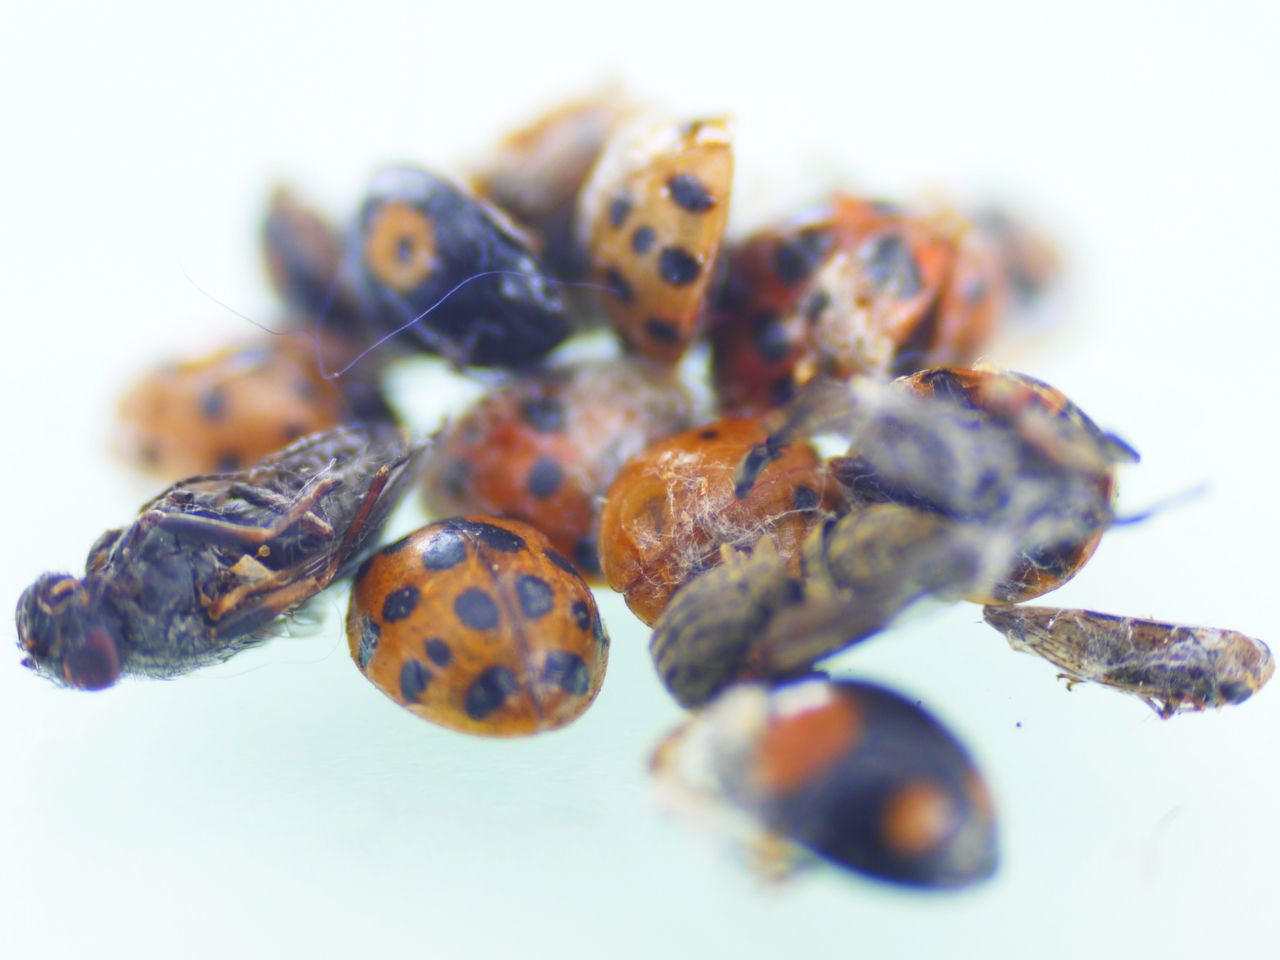 19395003700 - collection of dead ladybirds and a fly covered in.jpg